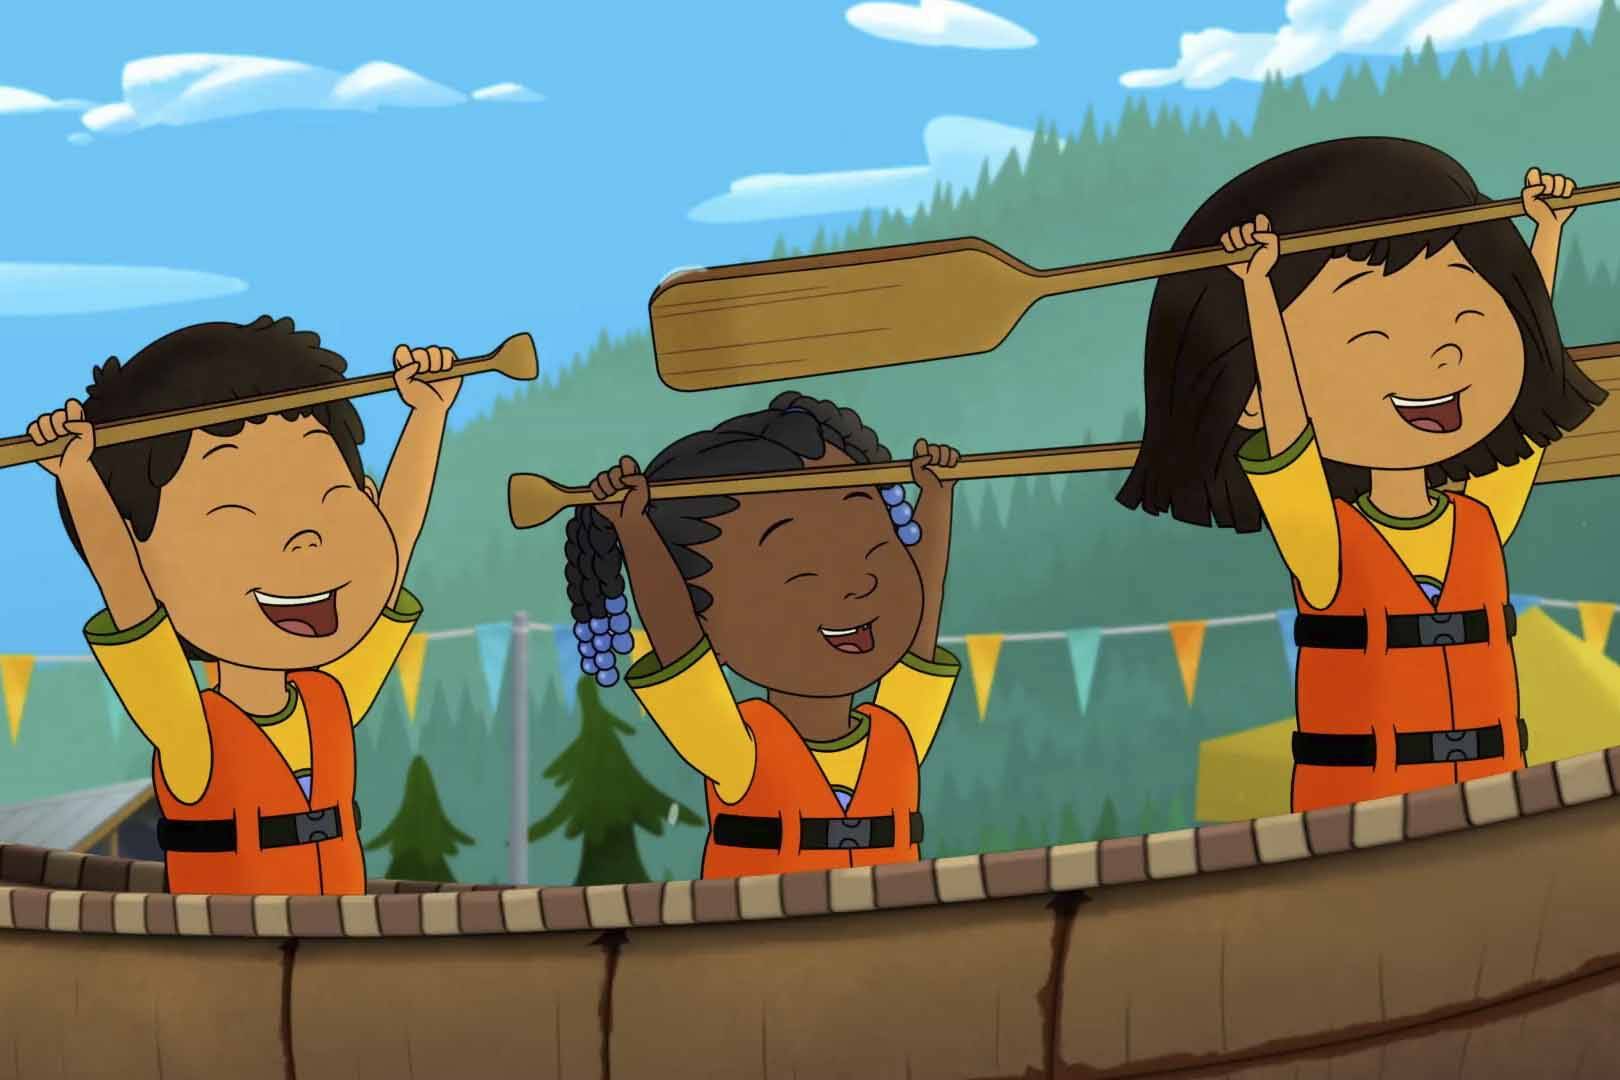 This image released by PBS shows characters, from left, Tooey, voiced by Sequoia Janvier, Trini, voiced by Vienna Leacock and Molly, voiced by Sovereign Bill, in a scene from the animated series “Molly of Denali.” The animated show, which highlights the adventures of a 10-year-old Athabascan girl, Molly Mabray, has been nominated for two Emmys. (PBS)